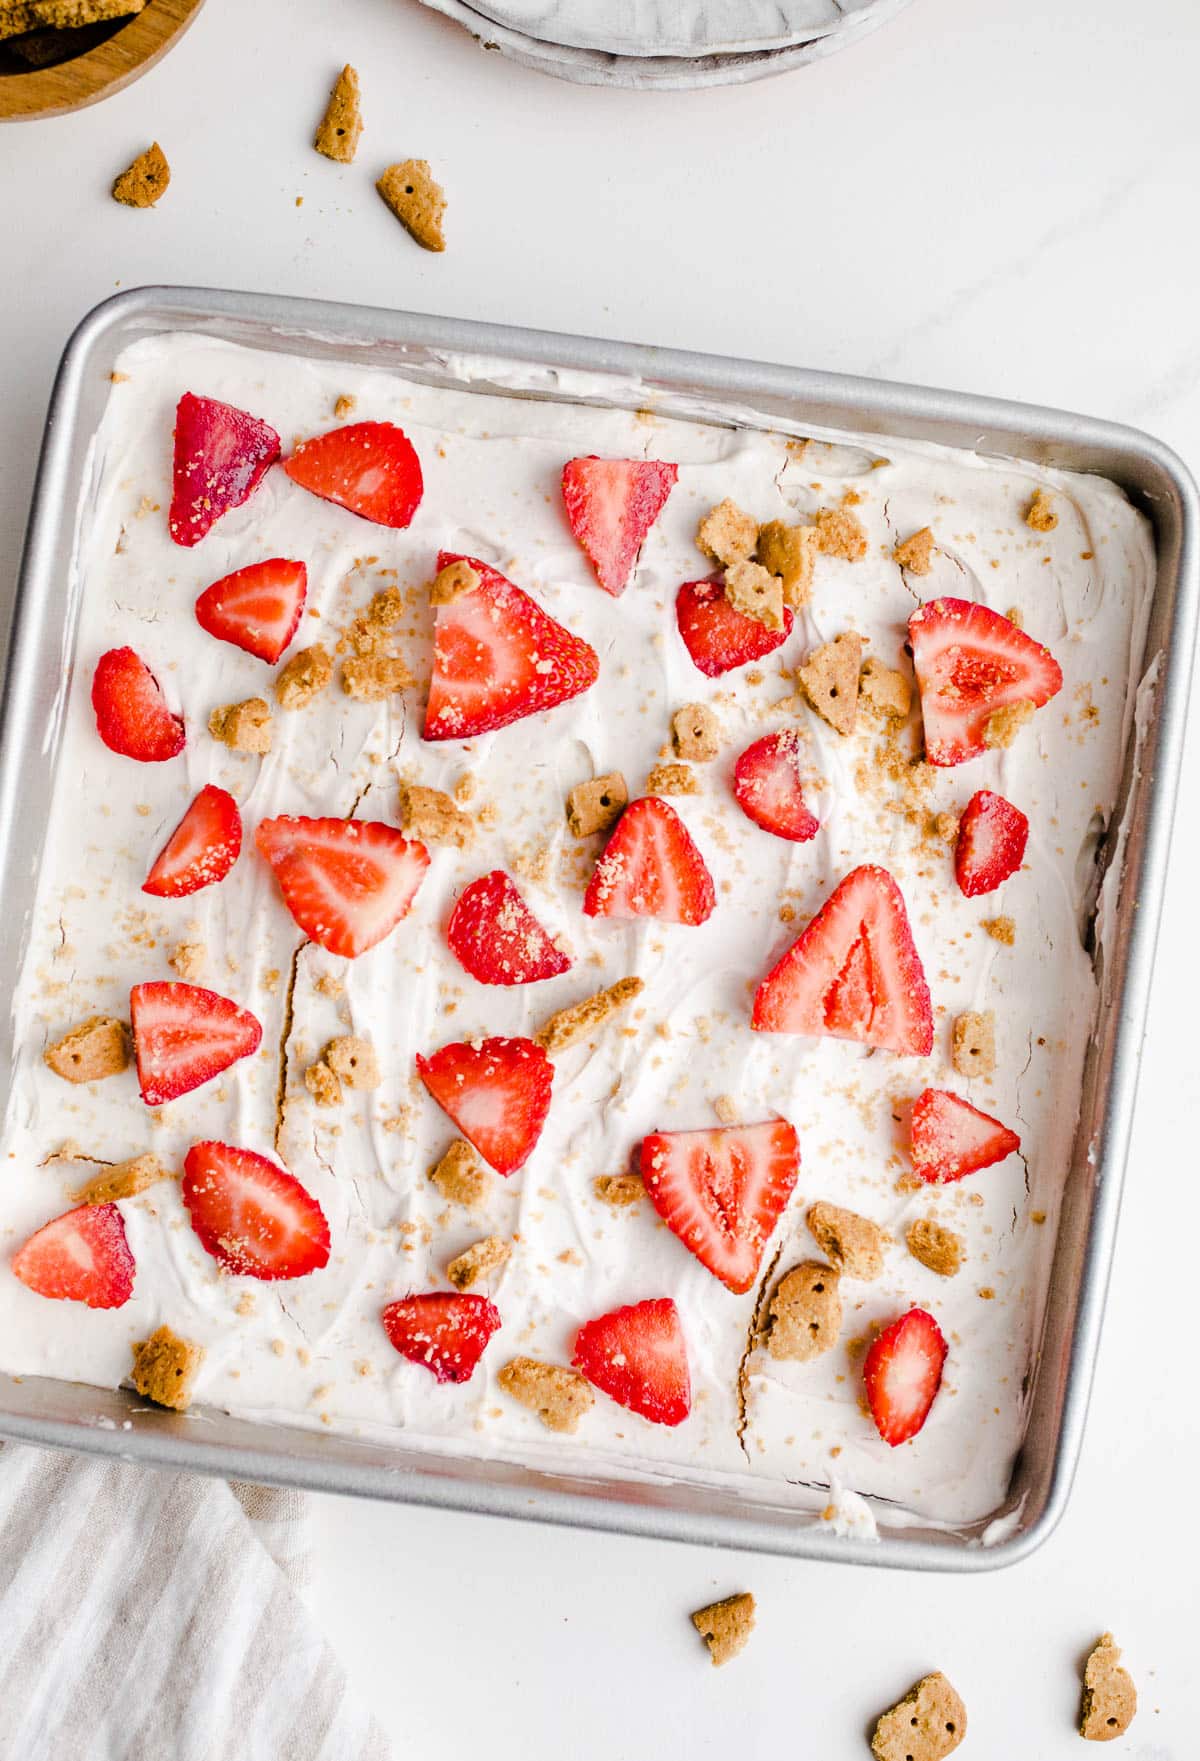 An icebox cake in a baking pan topped with strawberries and graham cracker crumbs.